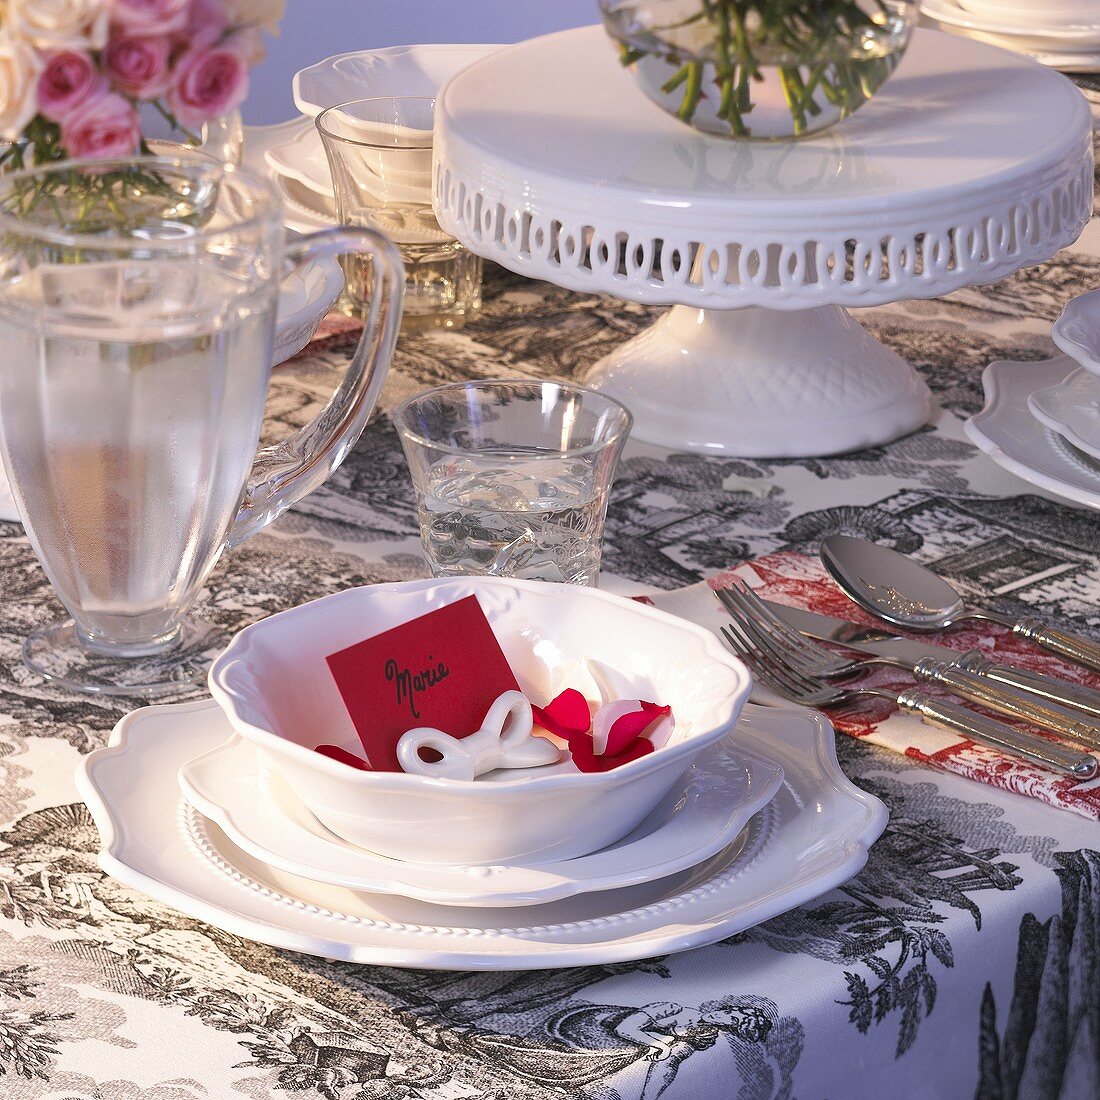 Festive table setting with white tableware & red place card